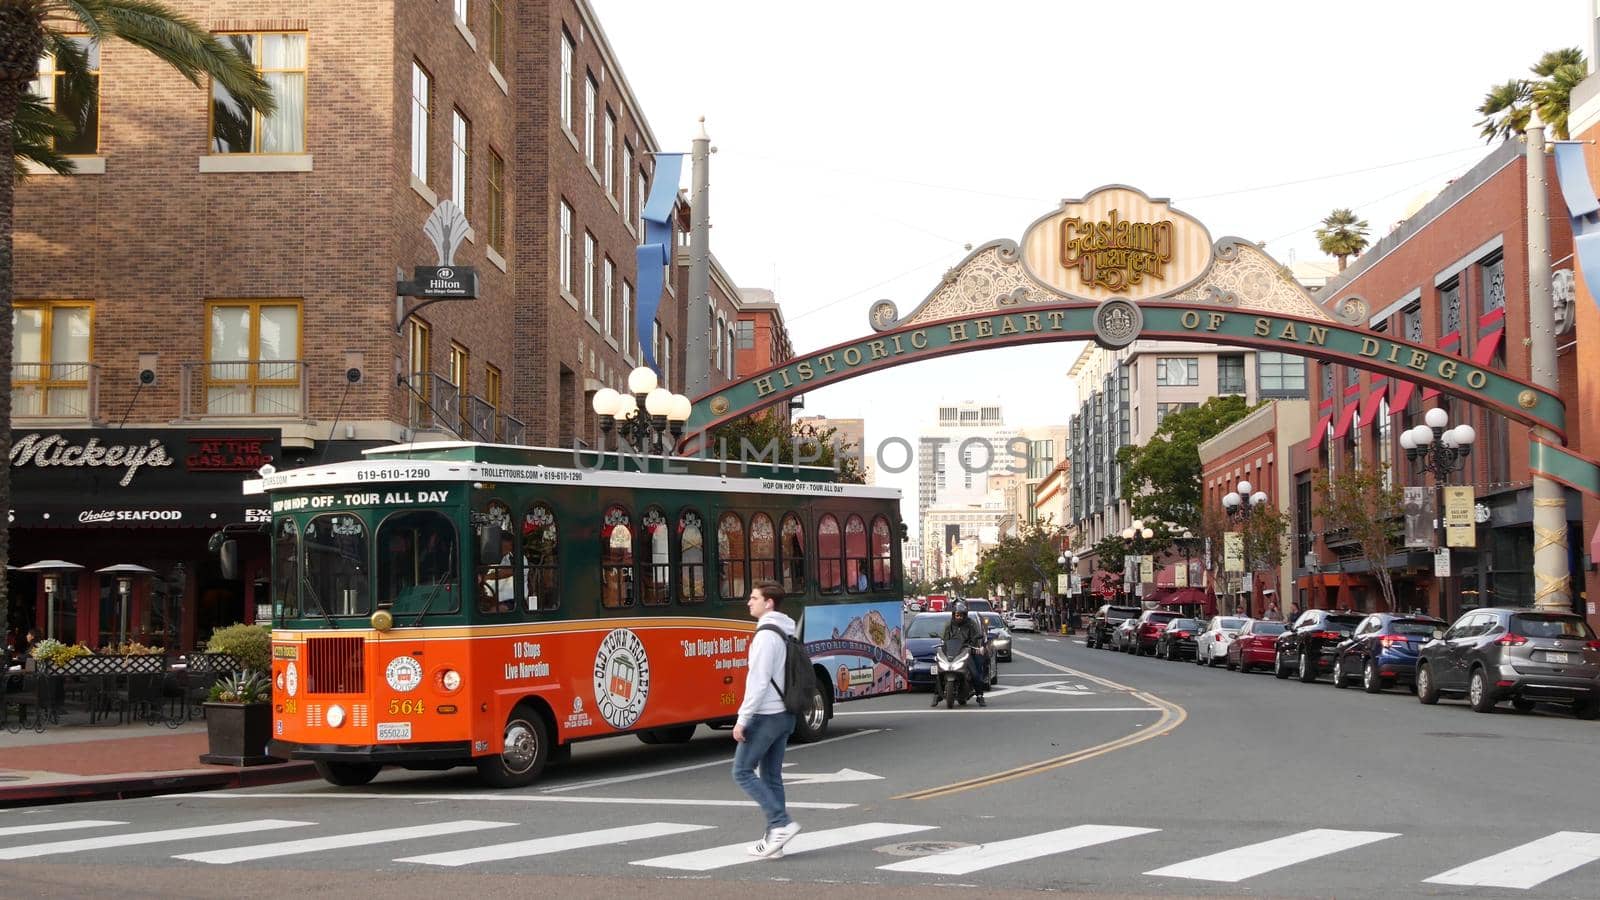 SAN DIEGO, CALIFORNIA USA - 30 JAN 2020: Gaslamp Quarter historic entrance arch sign on 5th avenue. Orange iconic retro trolley, hop-on hop-off bus and tourist landmark, Old Town Sightseeing Tour.